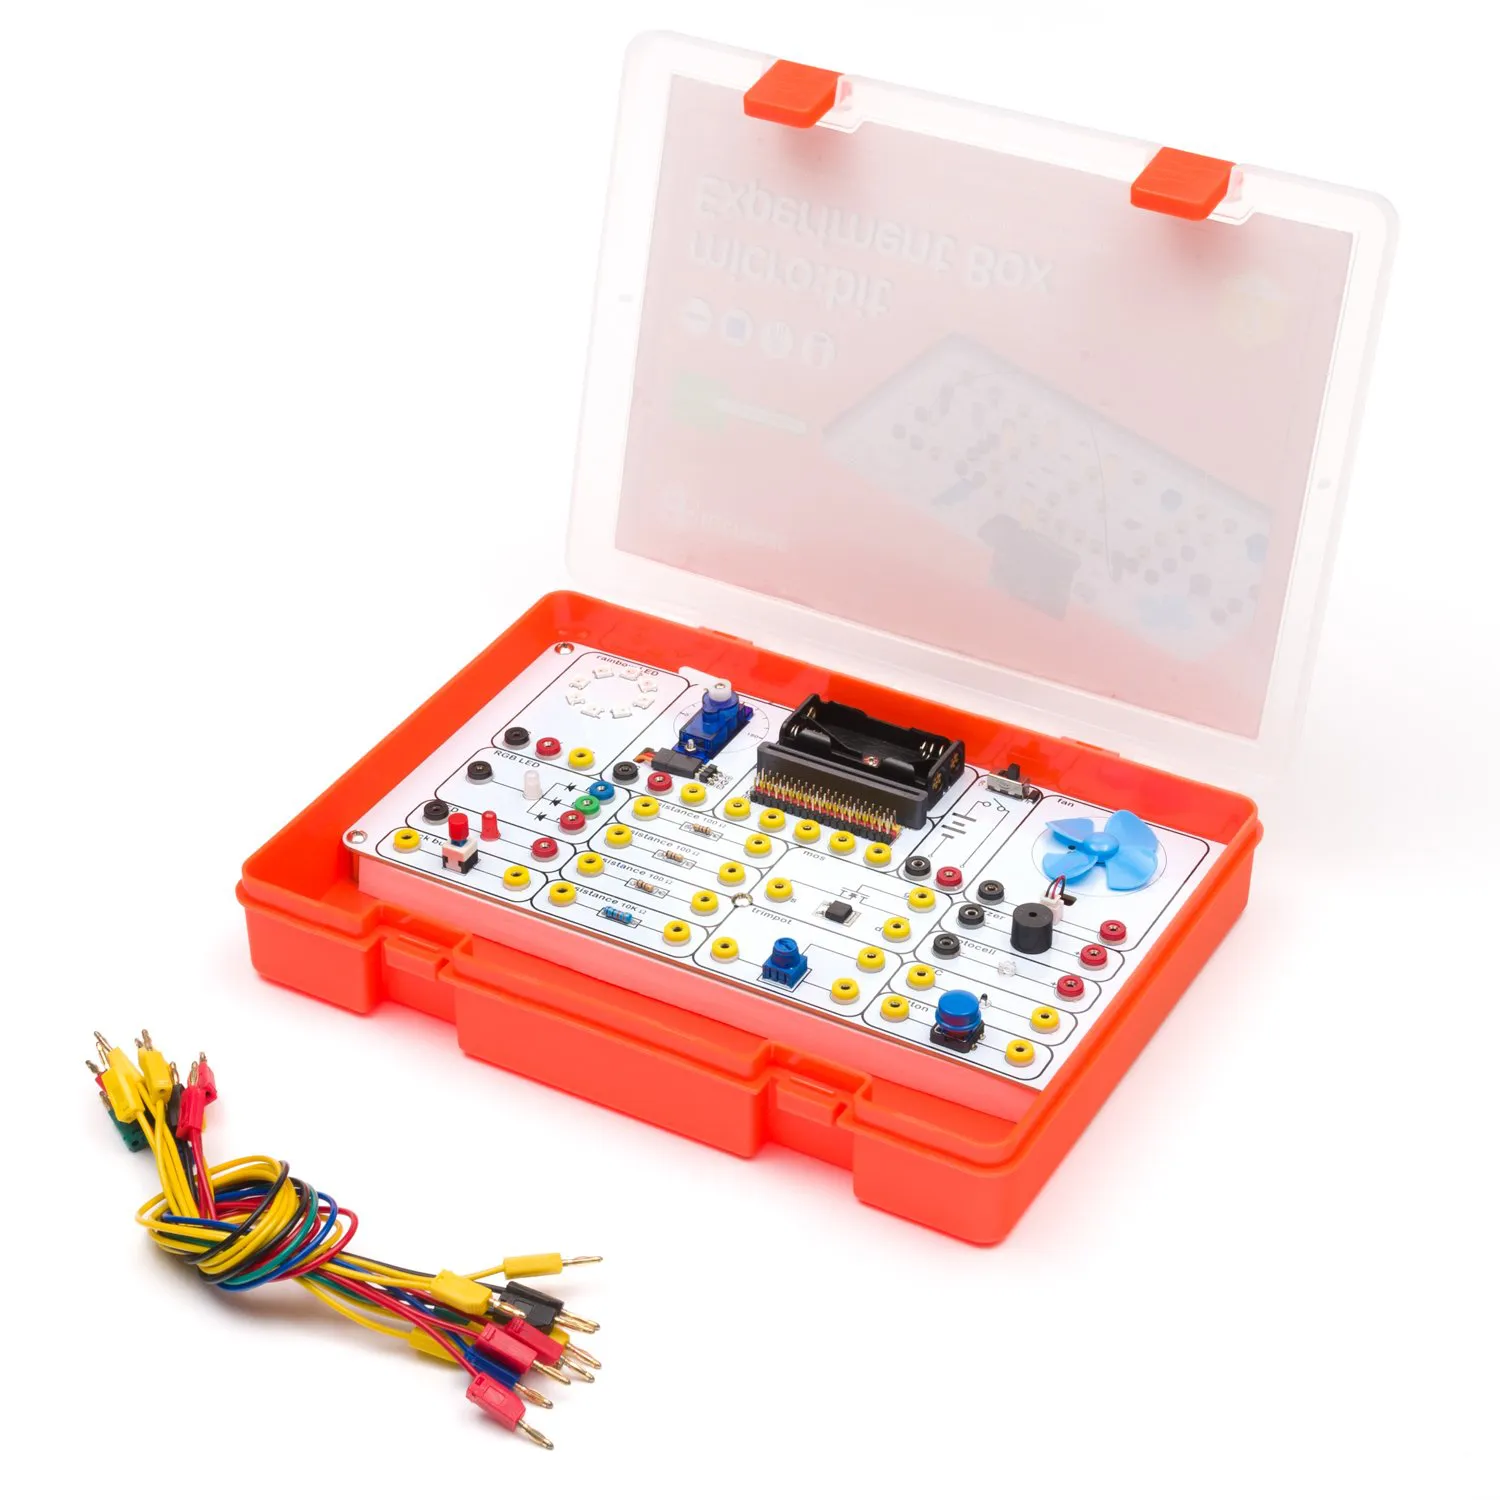 Photo of Micro:bit Experiment box for micro:bit (without micro:bit)